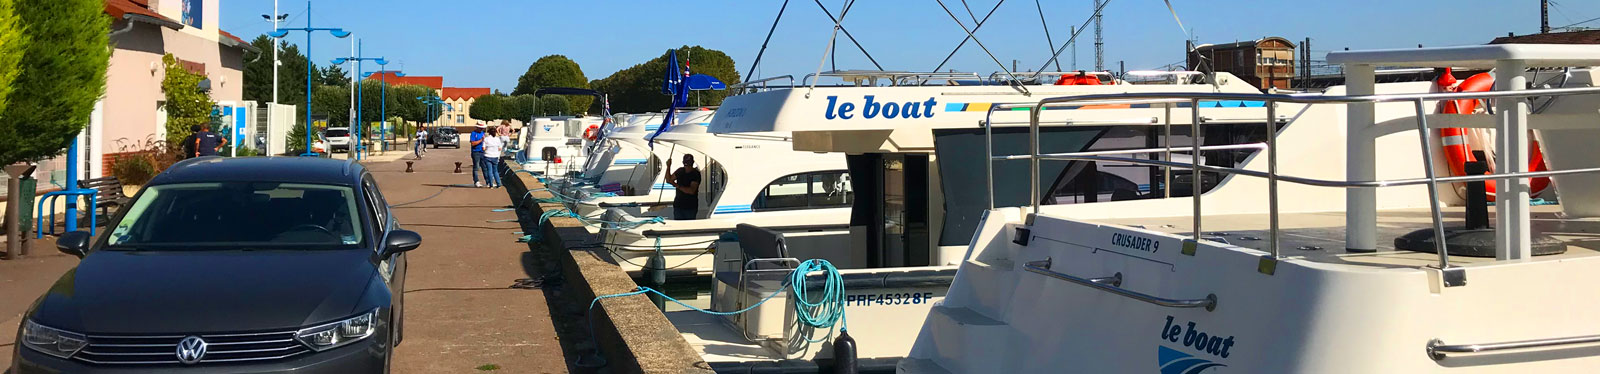 Long distance taxi and transfers from Paris to Le Boat bases